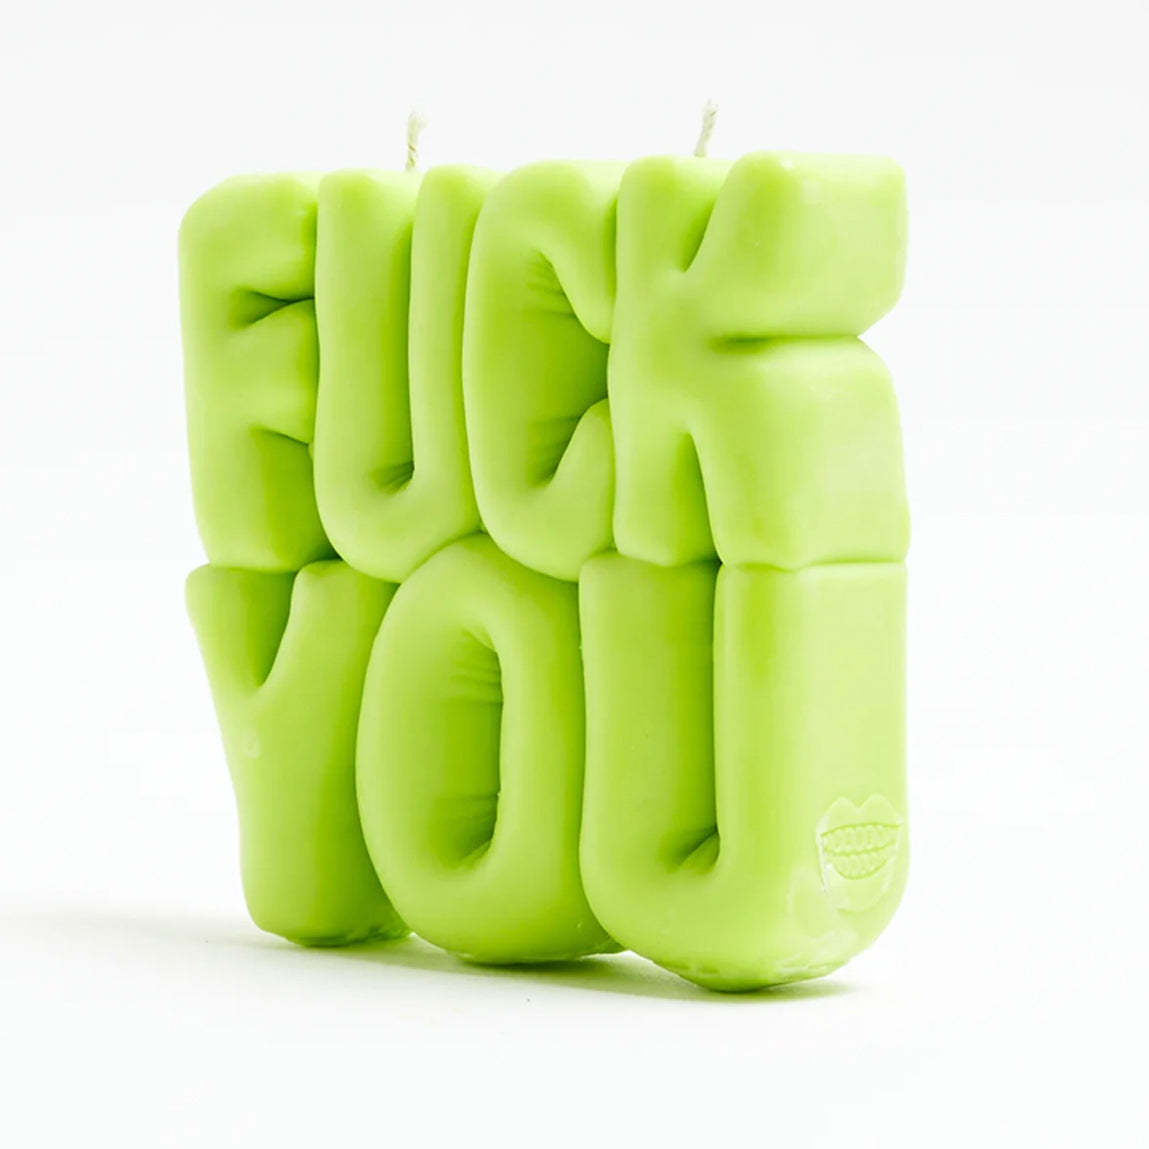 Wavey Casa "FUCK YOU" Puffer Candle - Green - Coconut & Lime Scented